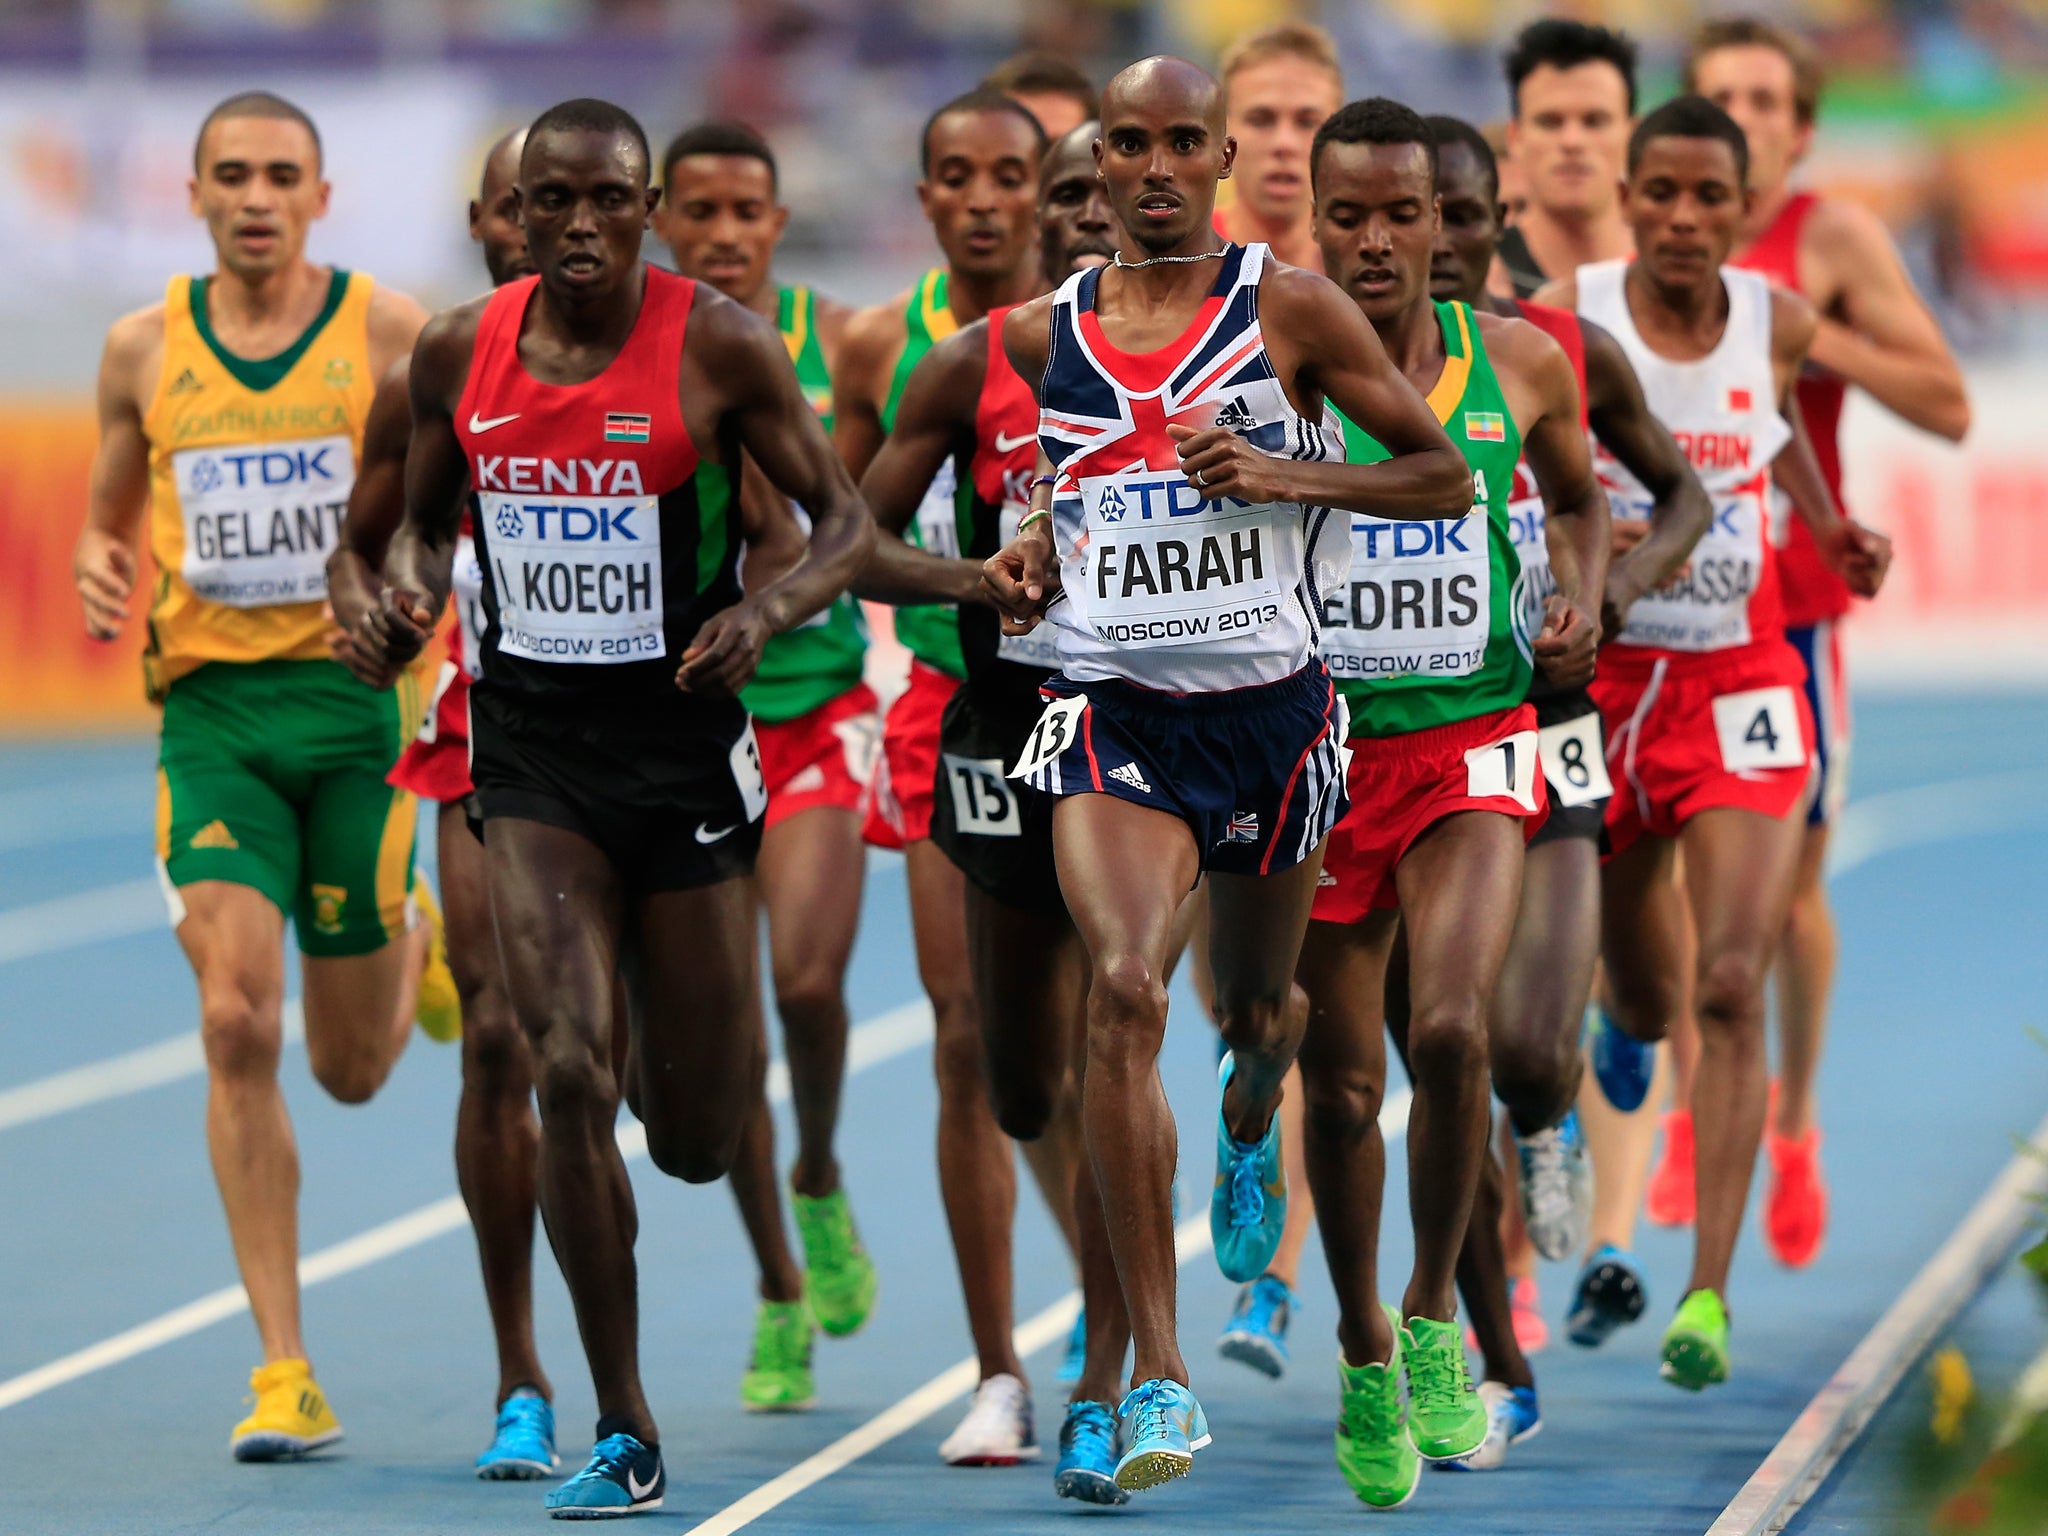 Mo Farah leads the 5,000m at the World Athletics Championships